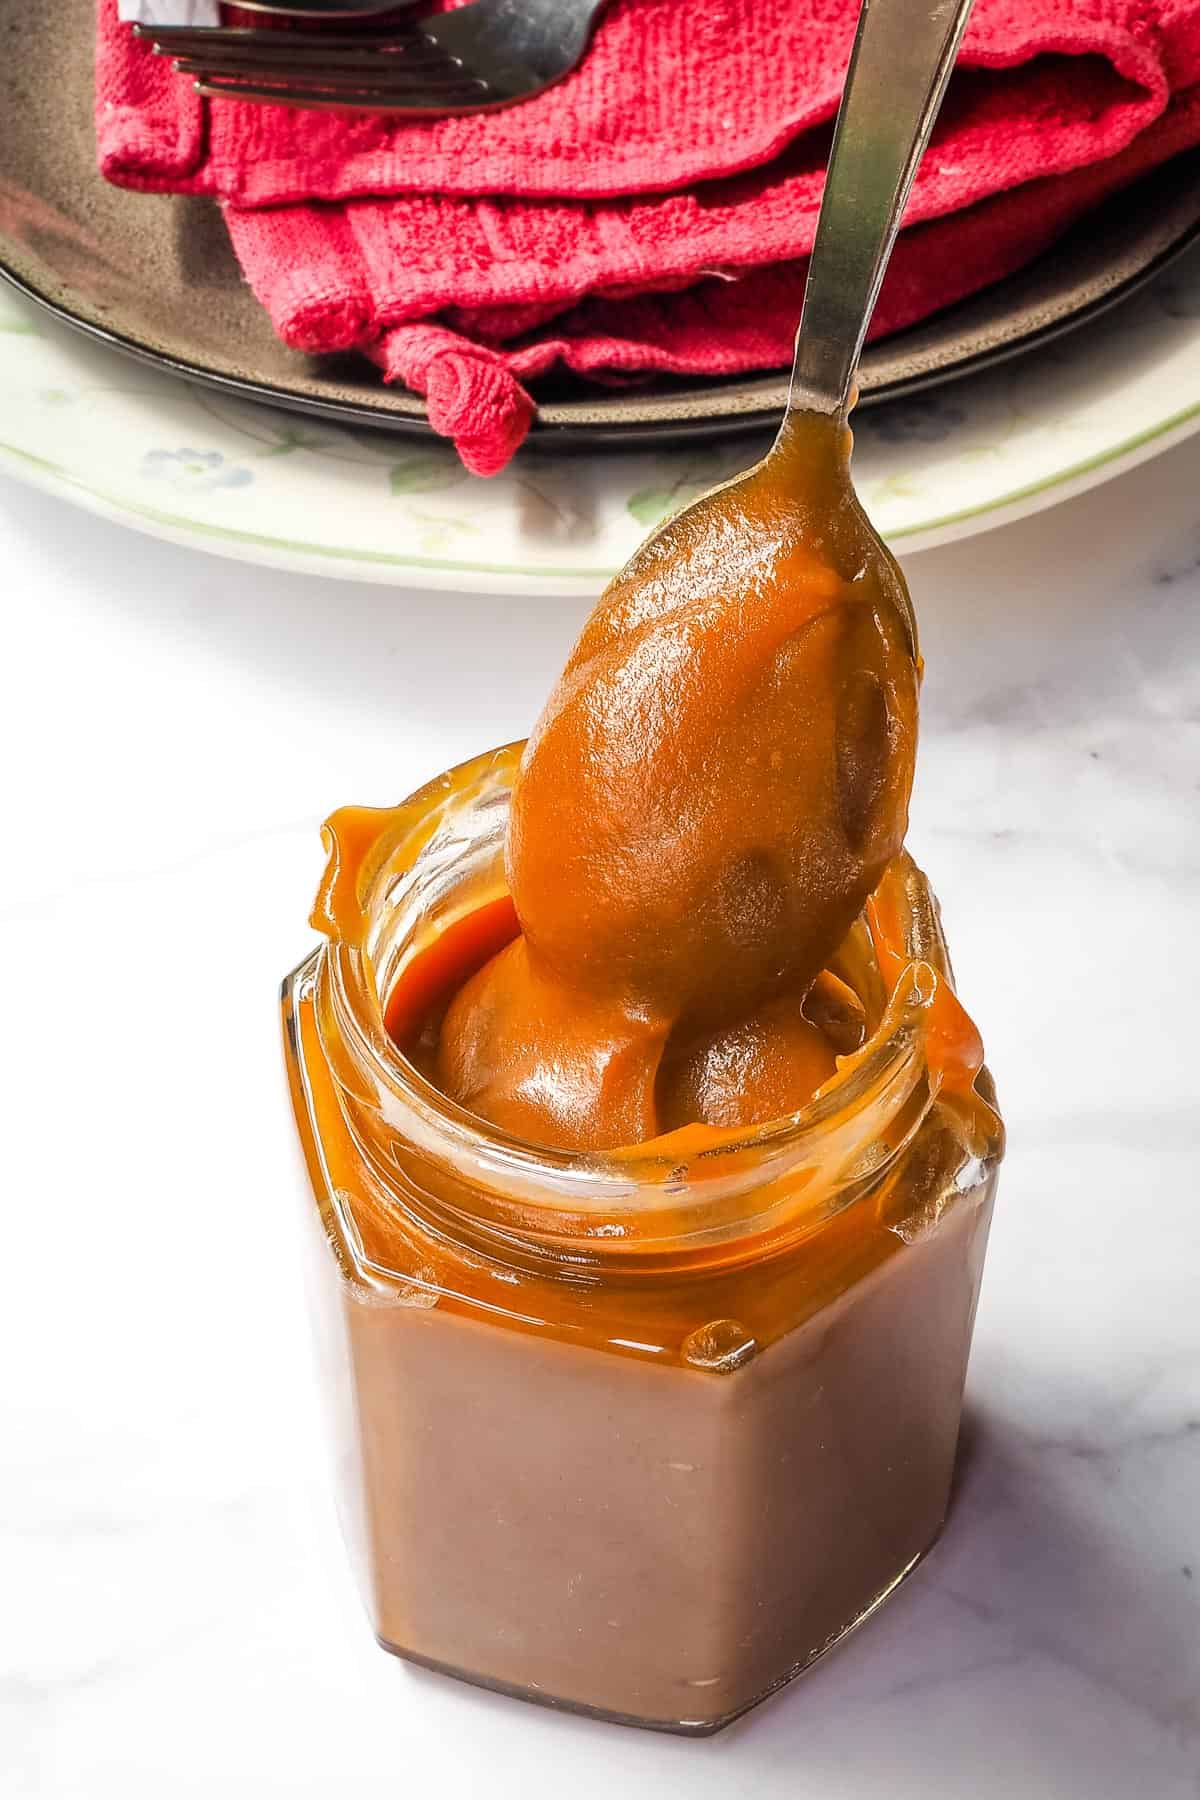 A spoon of salted caramel lifted up from a glass jar